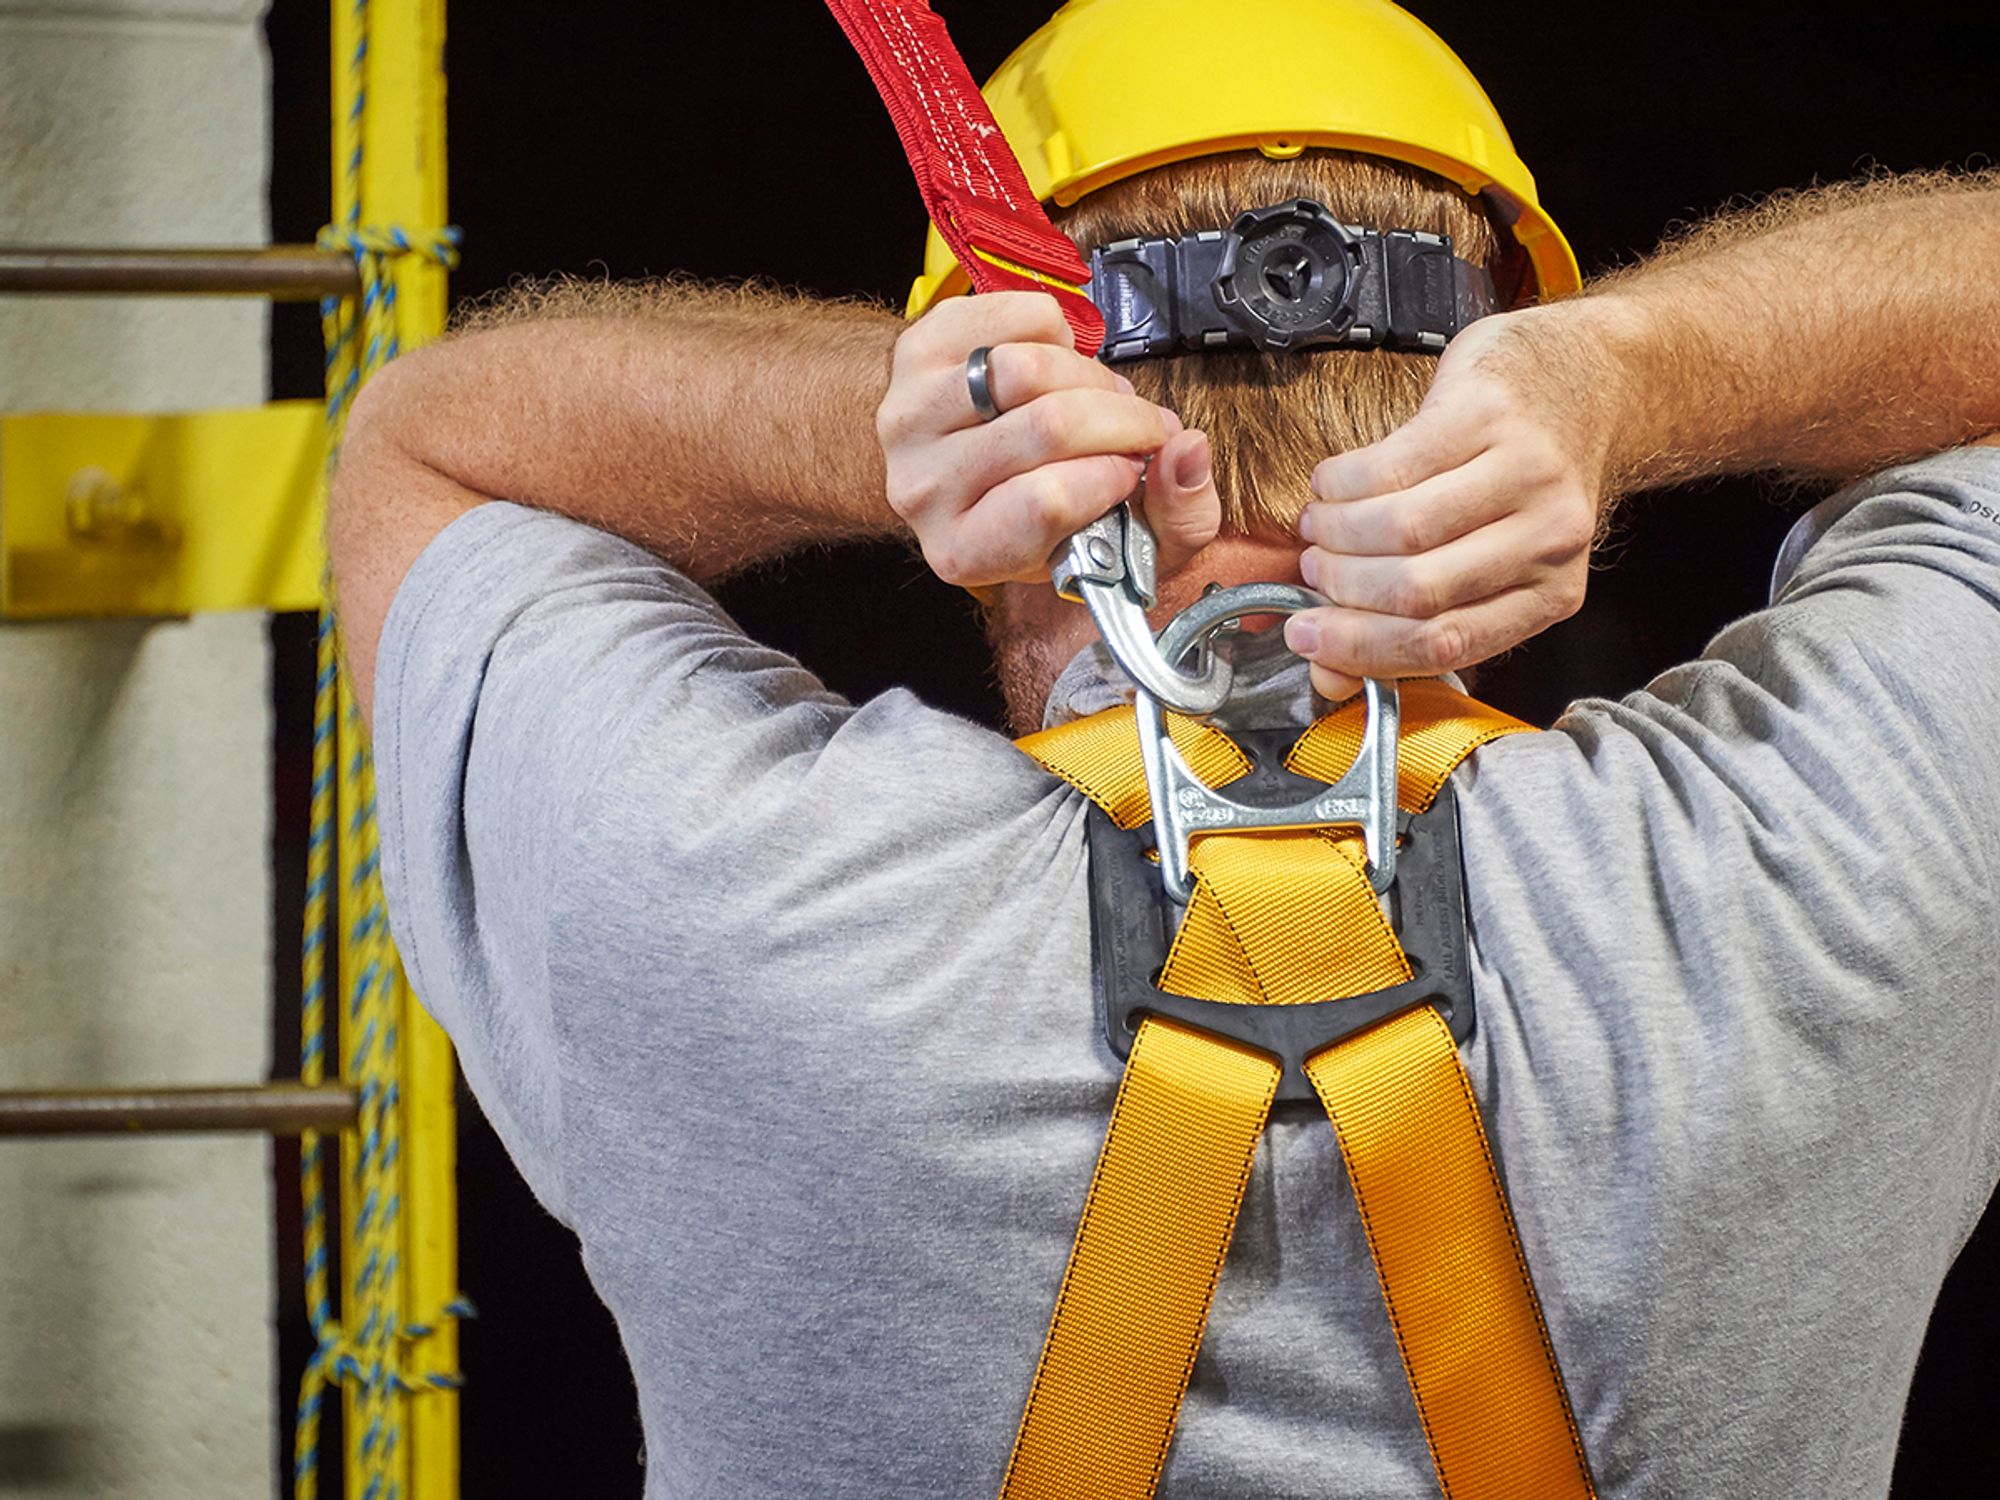 Adhere to design requirements for personal fall protection systems